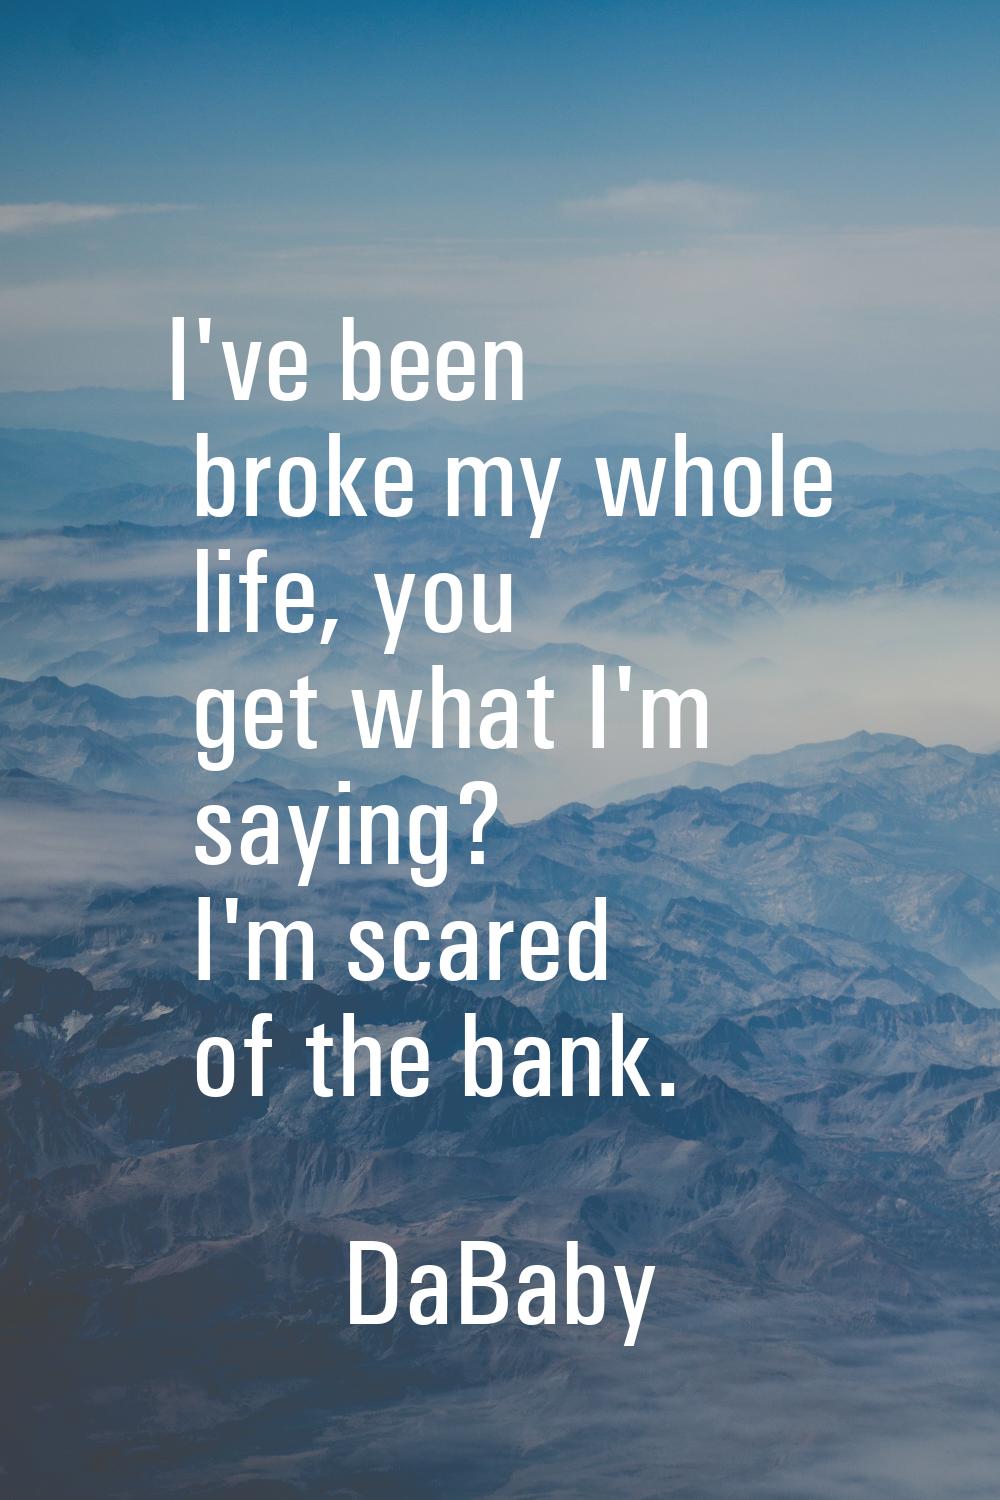 I've been broke my whole life, you get what I'm saying? I'm scared of the bank.